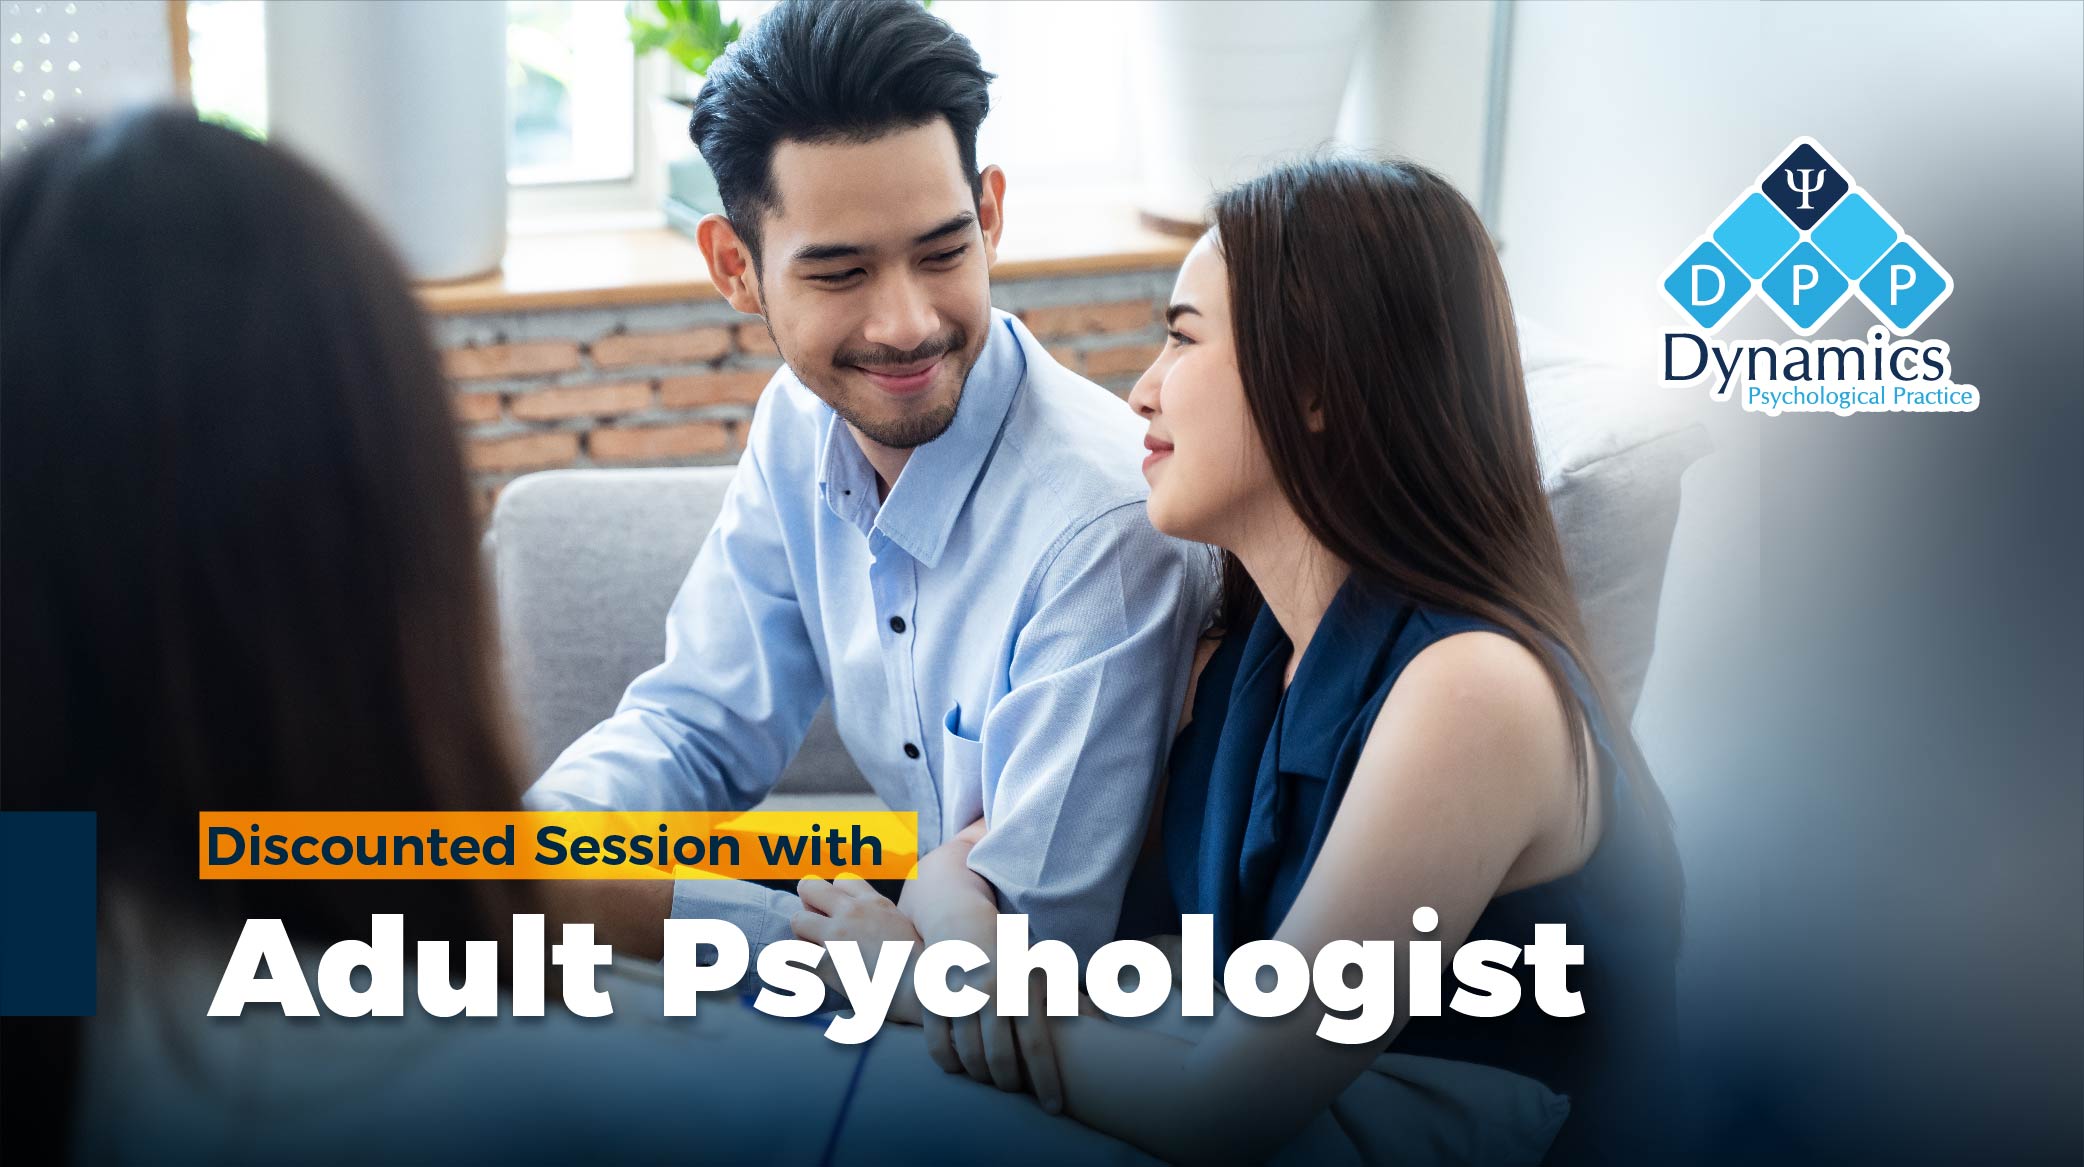 Discounted Session with Adult Psychologists